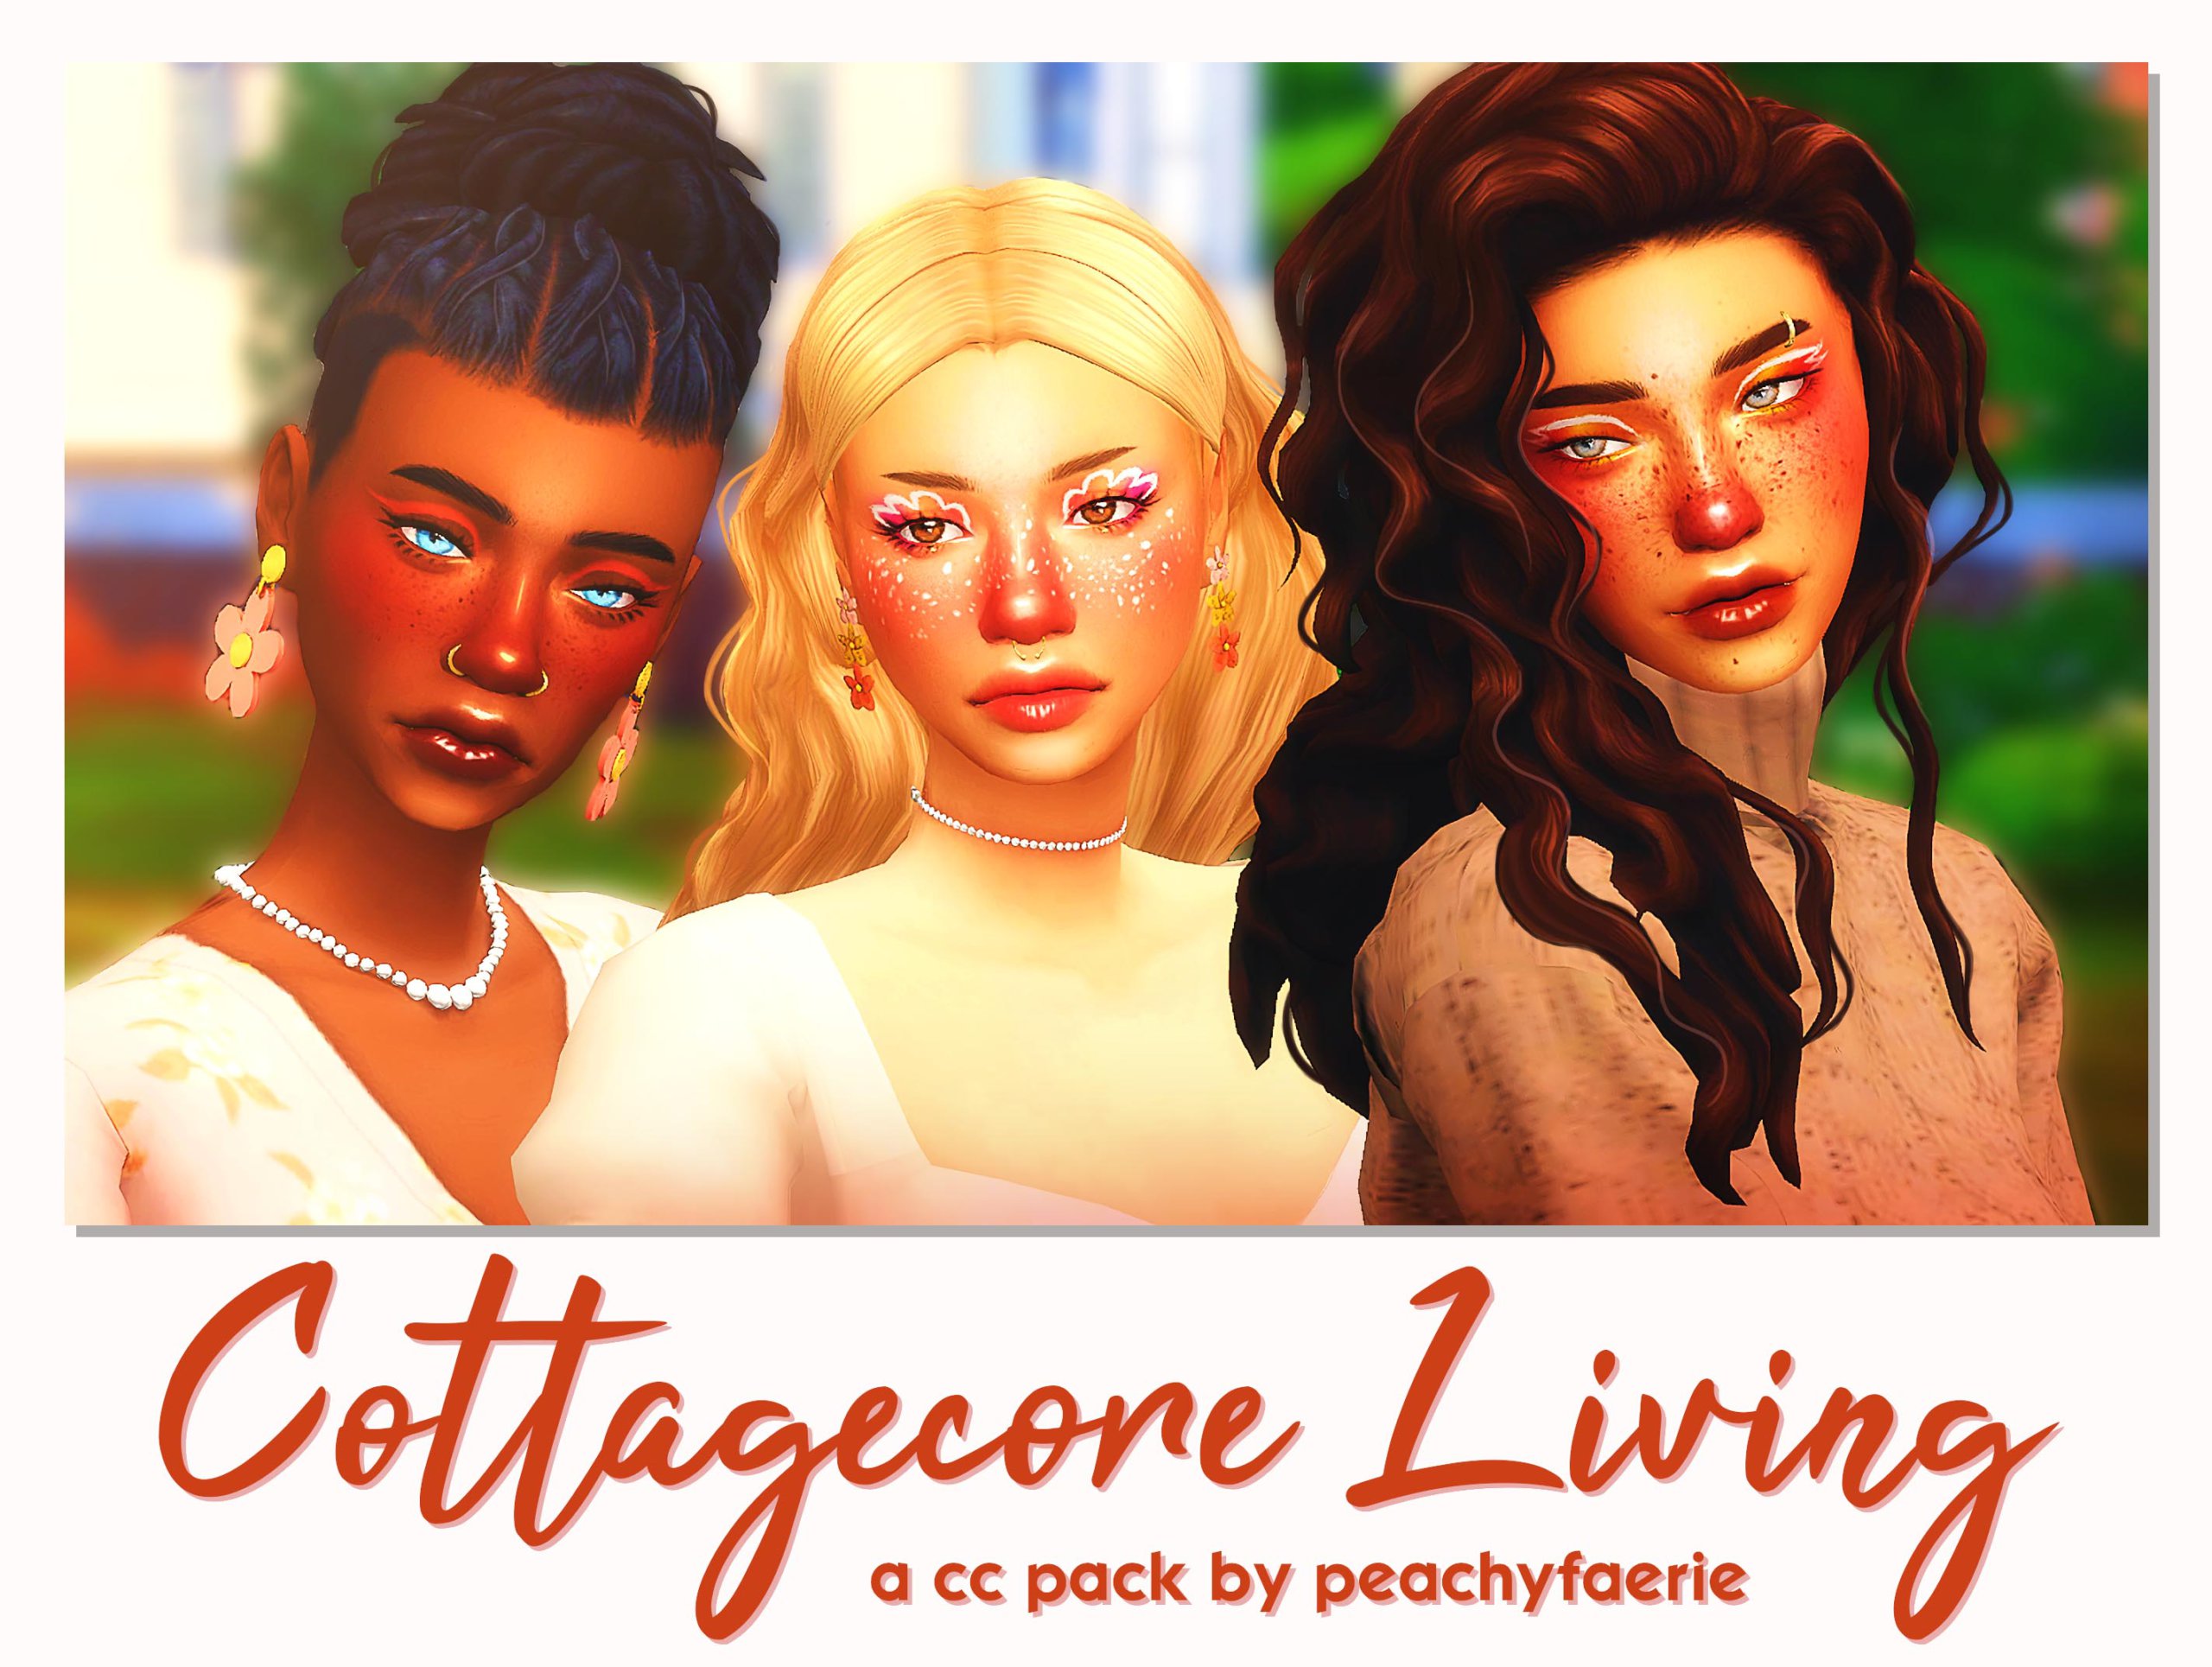 Sims 4 Cottagecore Living - A CC Pack | The Sims Book